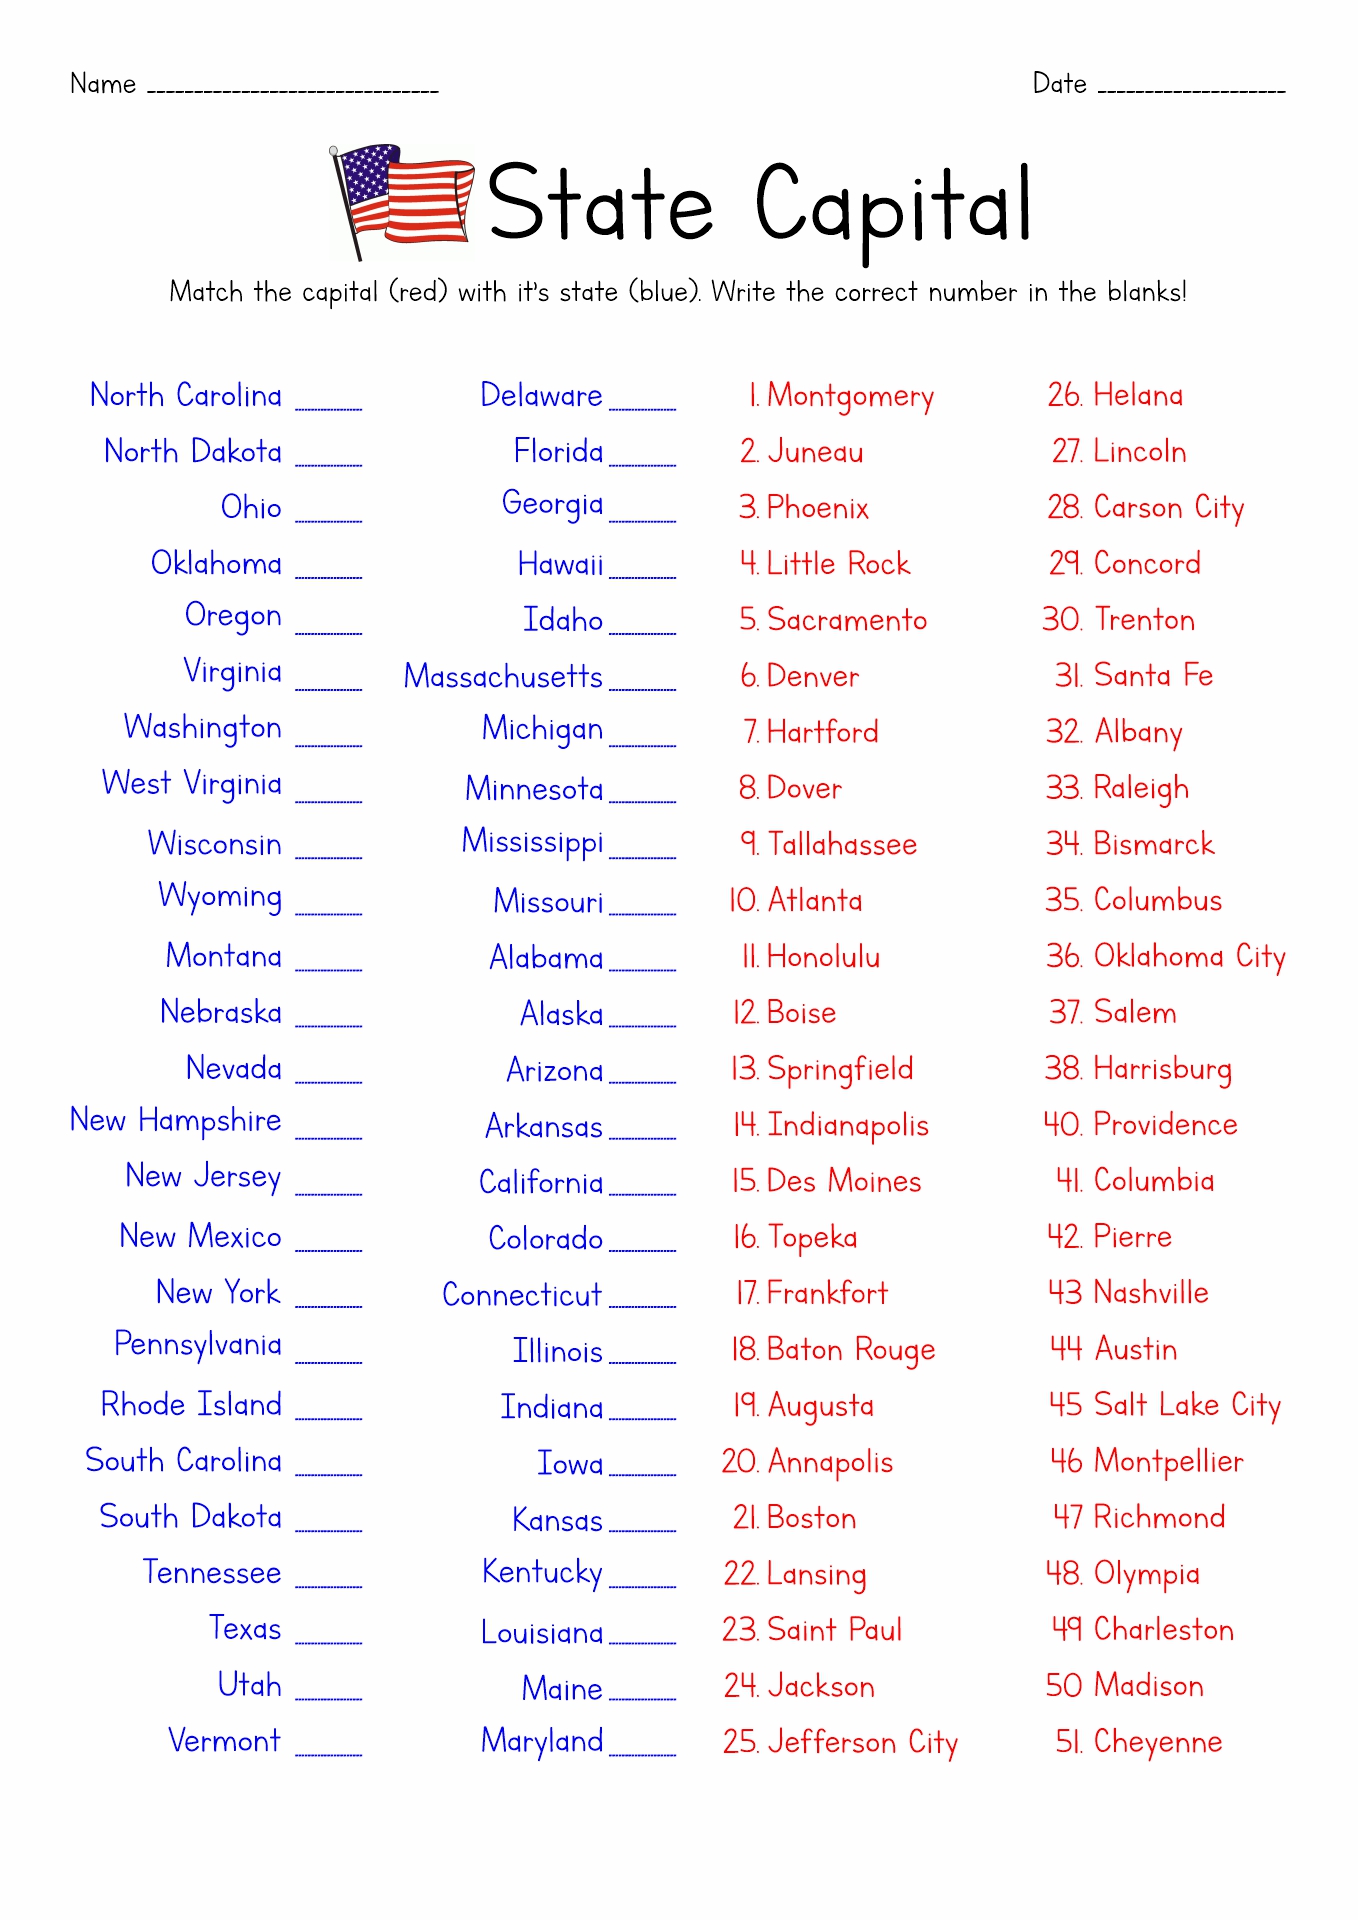 11-best-images-of-50-states-and-capitals-list-worksheet-5th-grade